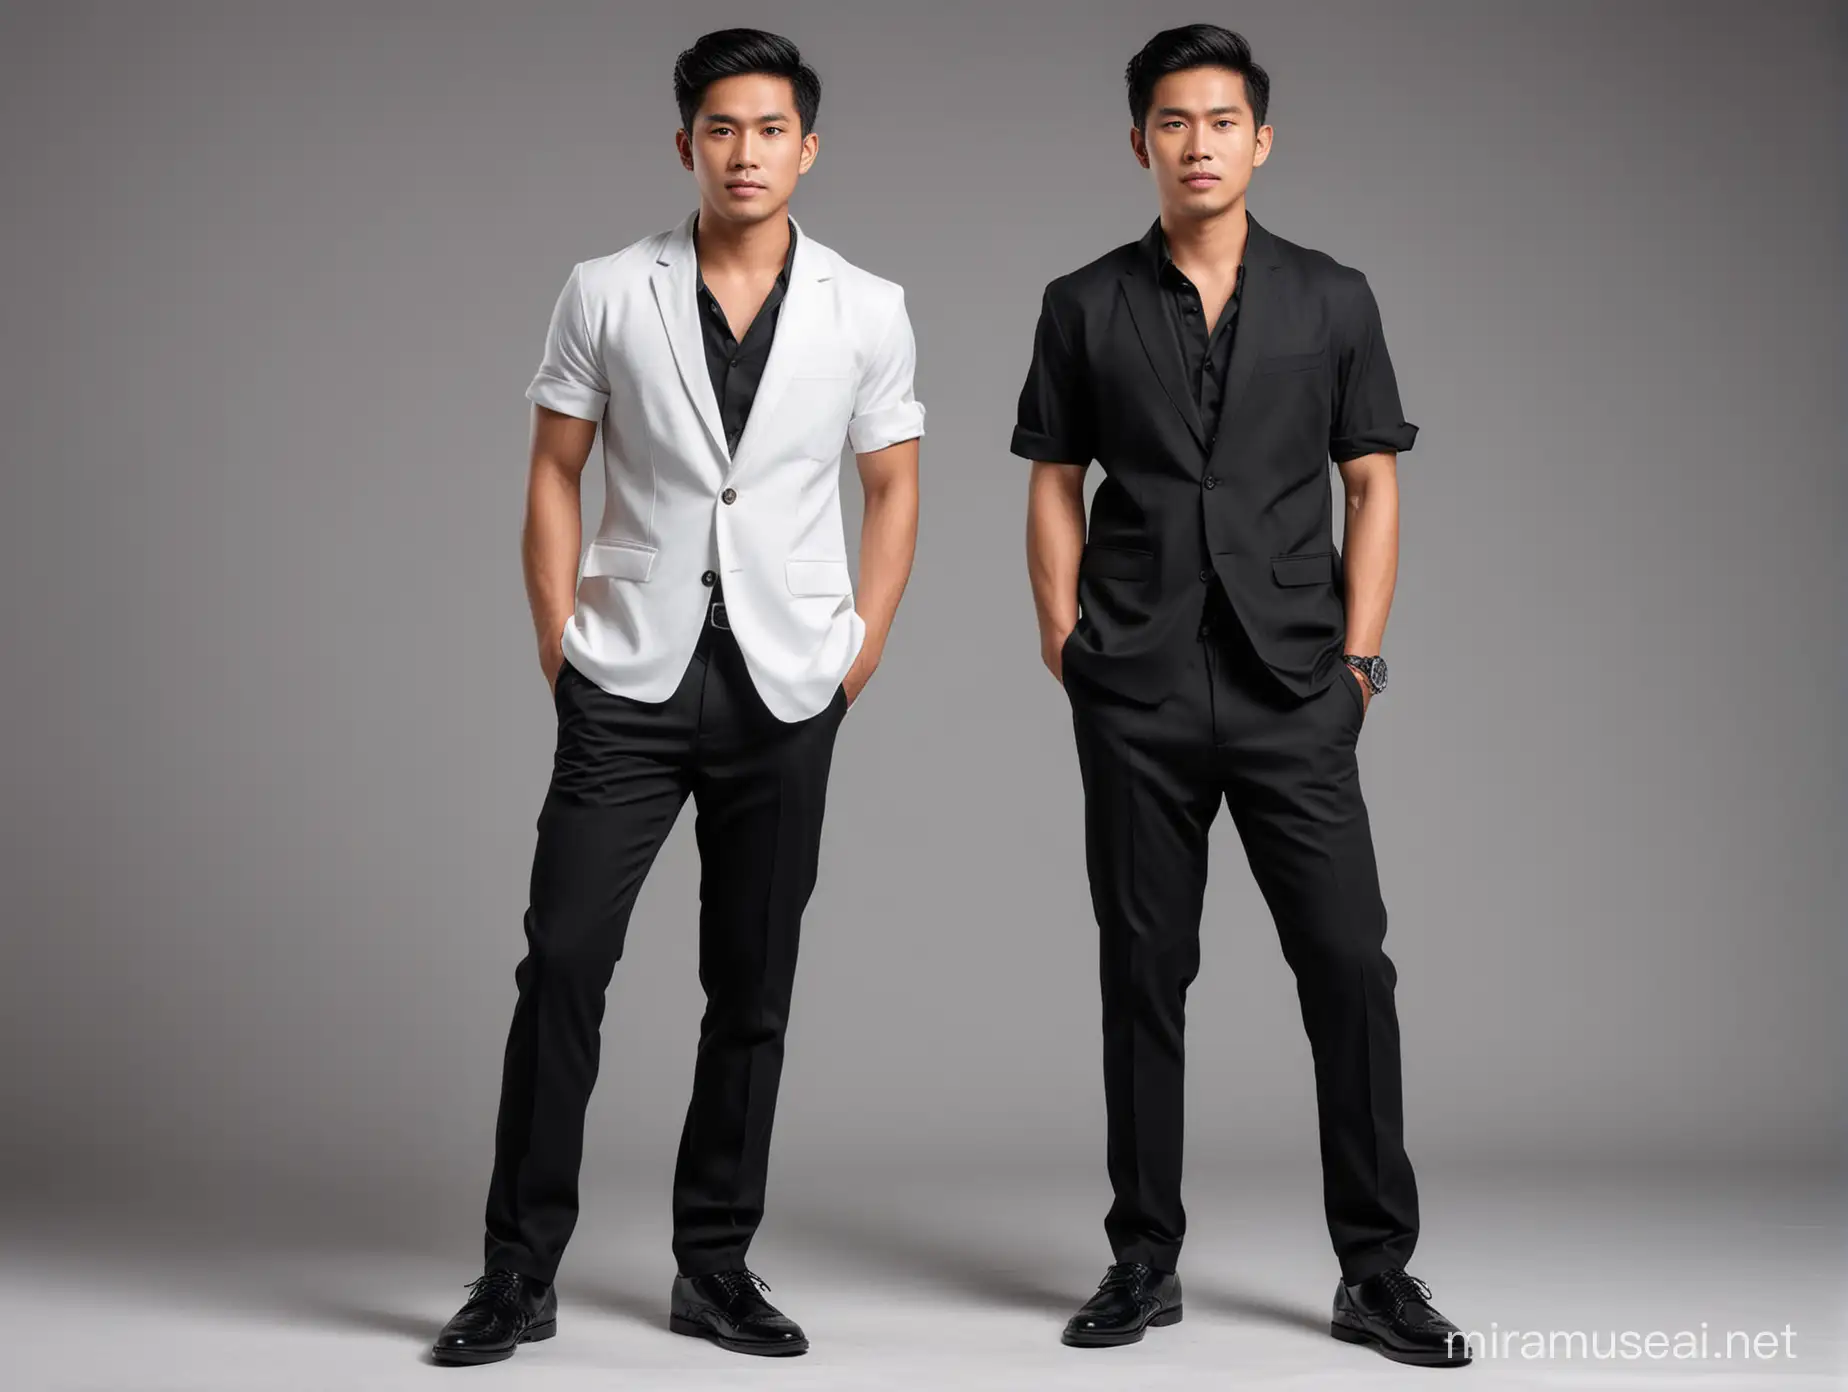 Three Indonesian Men in Stylish Black and White Outfits